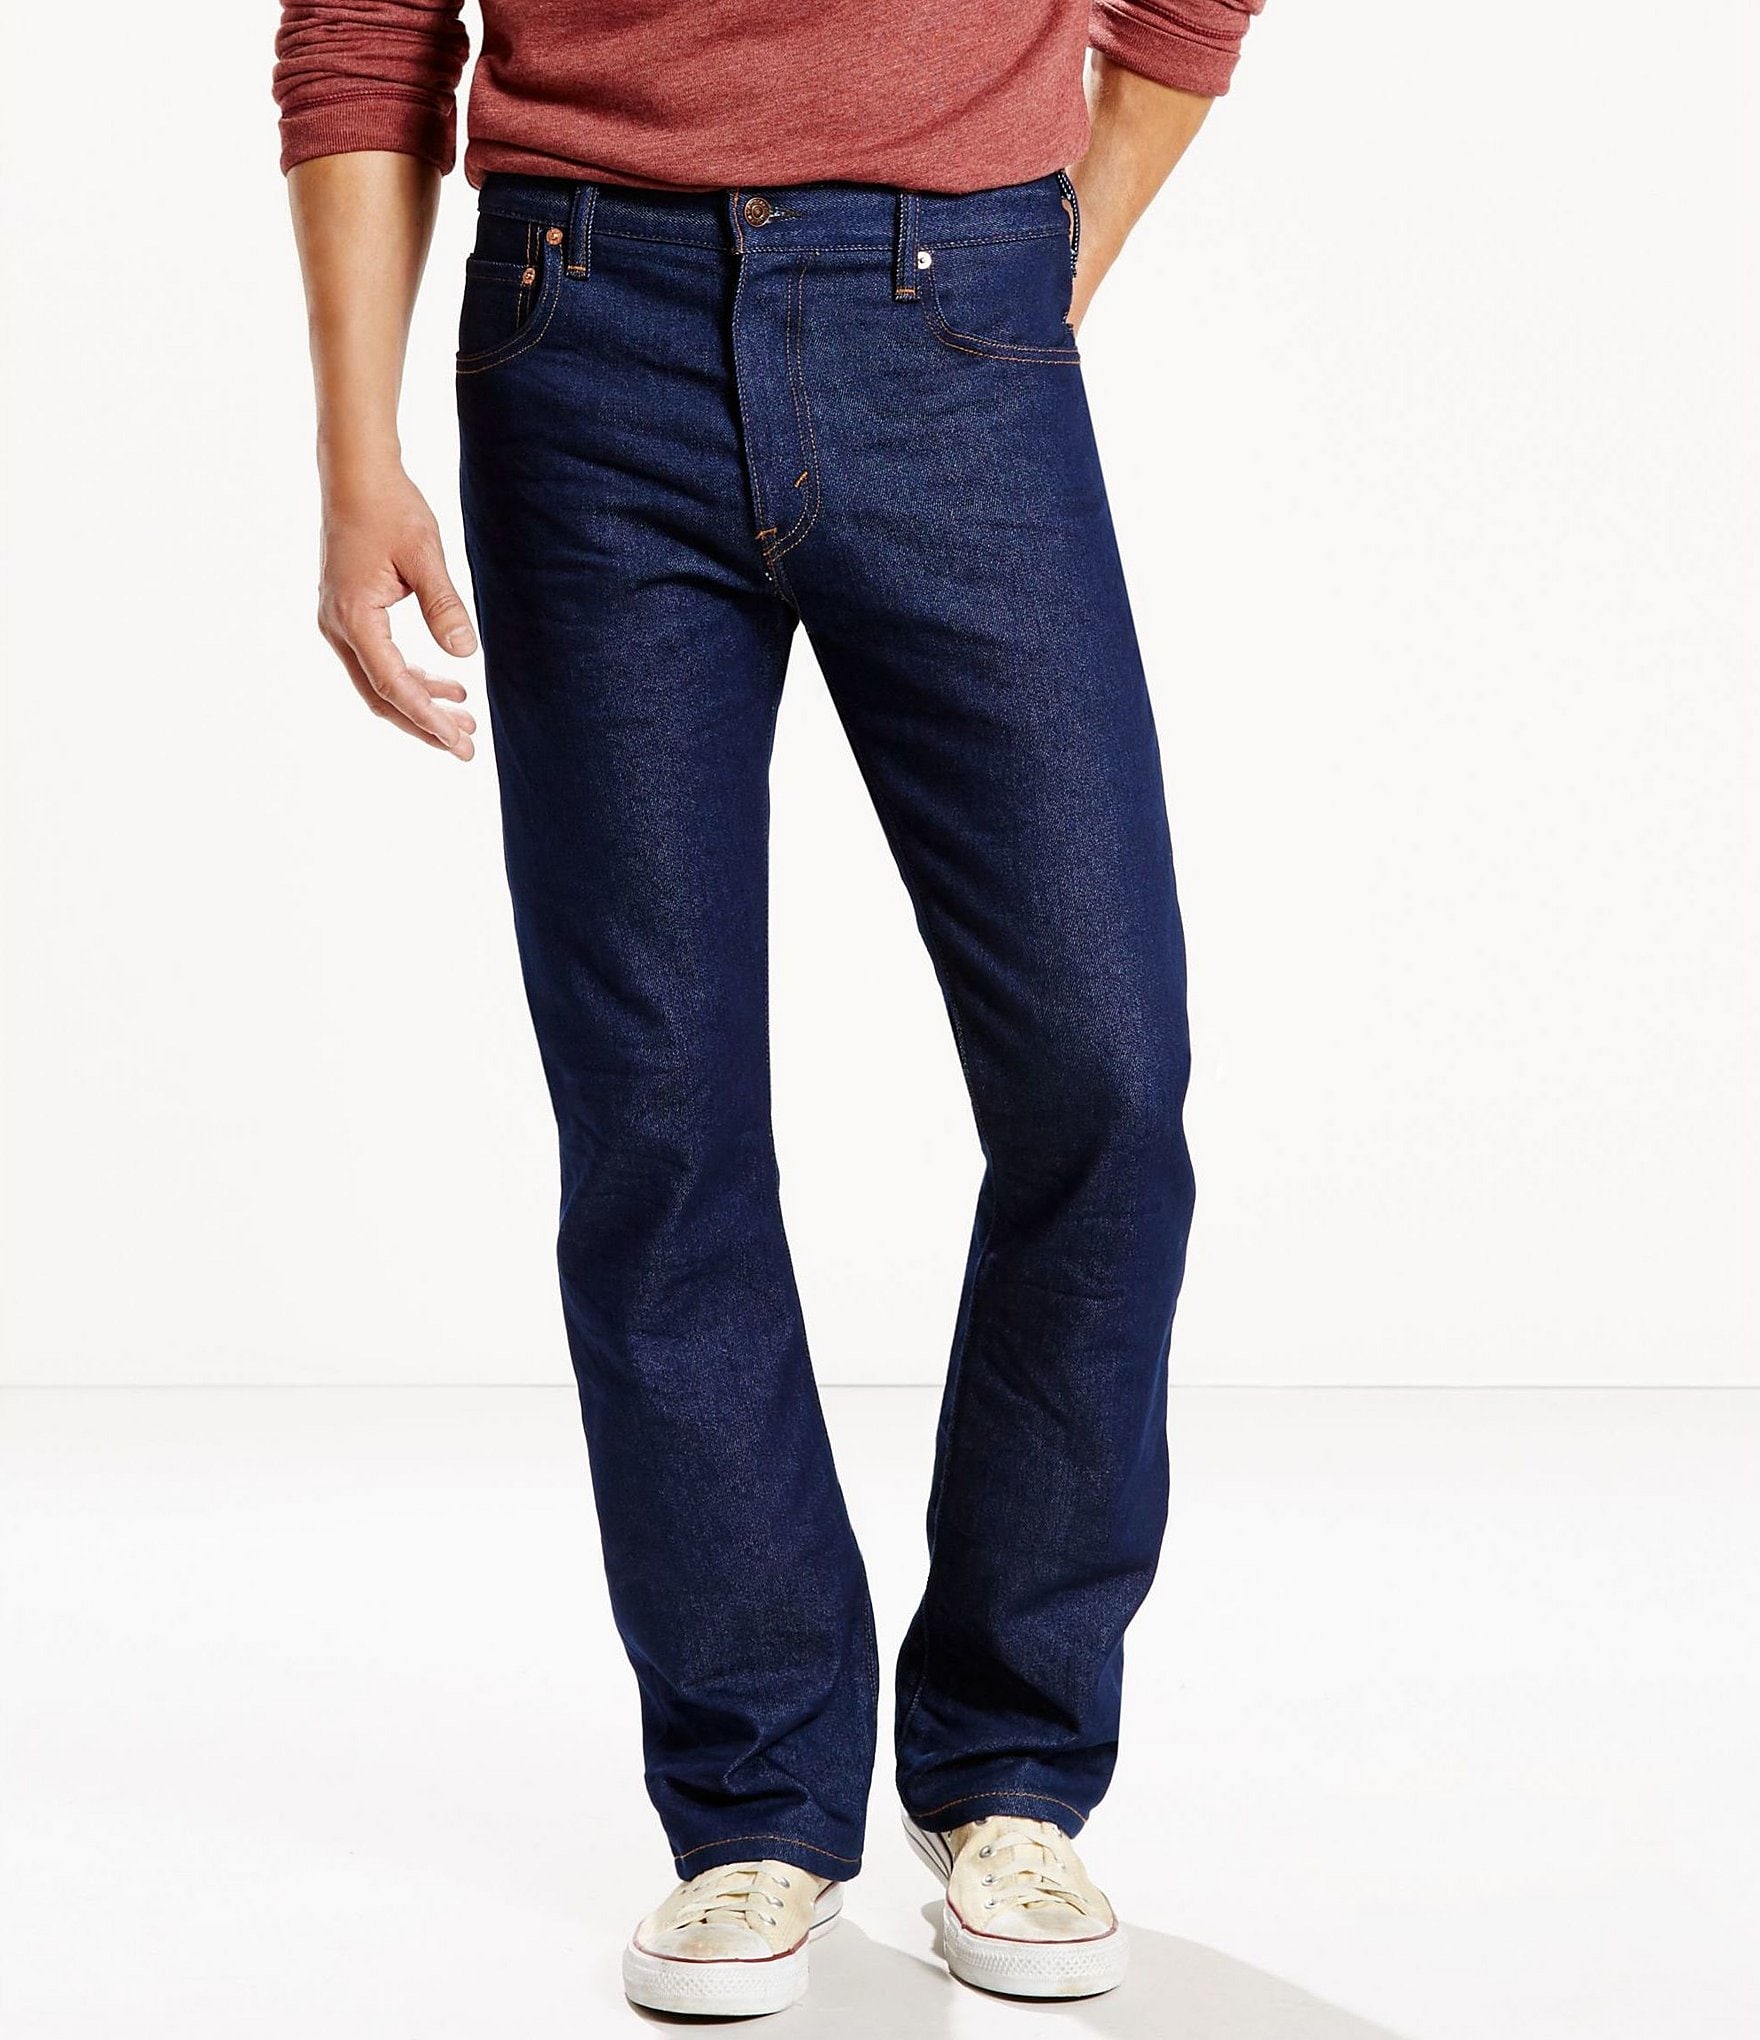 levi button fly bootcut jeans